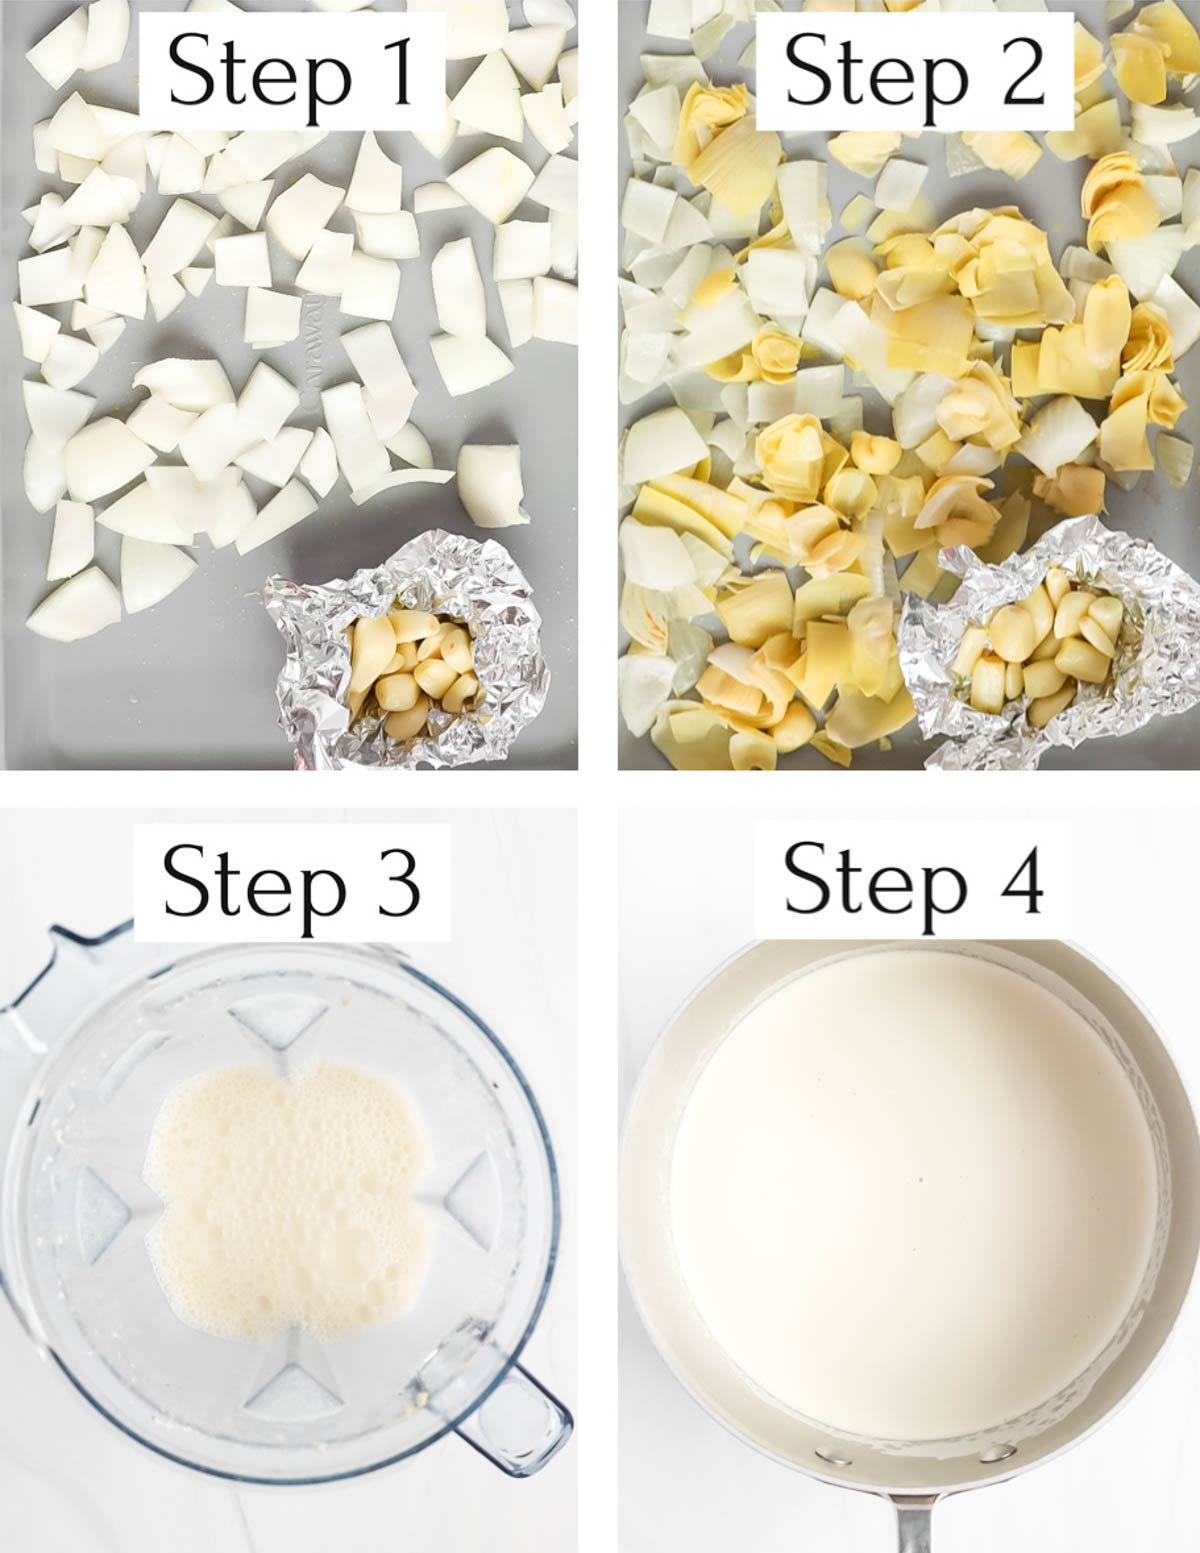 4 step by step images including: step 1: uncooked garlic and onions on a baking sheet, step 2: onion, artichoke hearts, and garlic on a baking sheet, step 3: white sauce in a blender, step 4: white sauce in a pan.